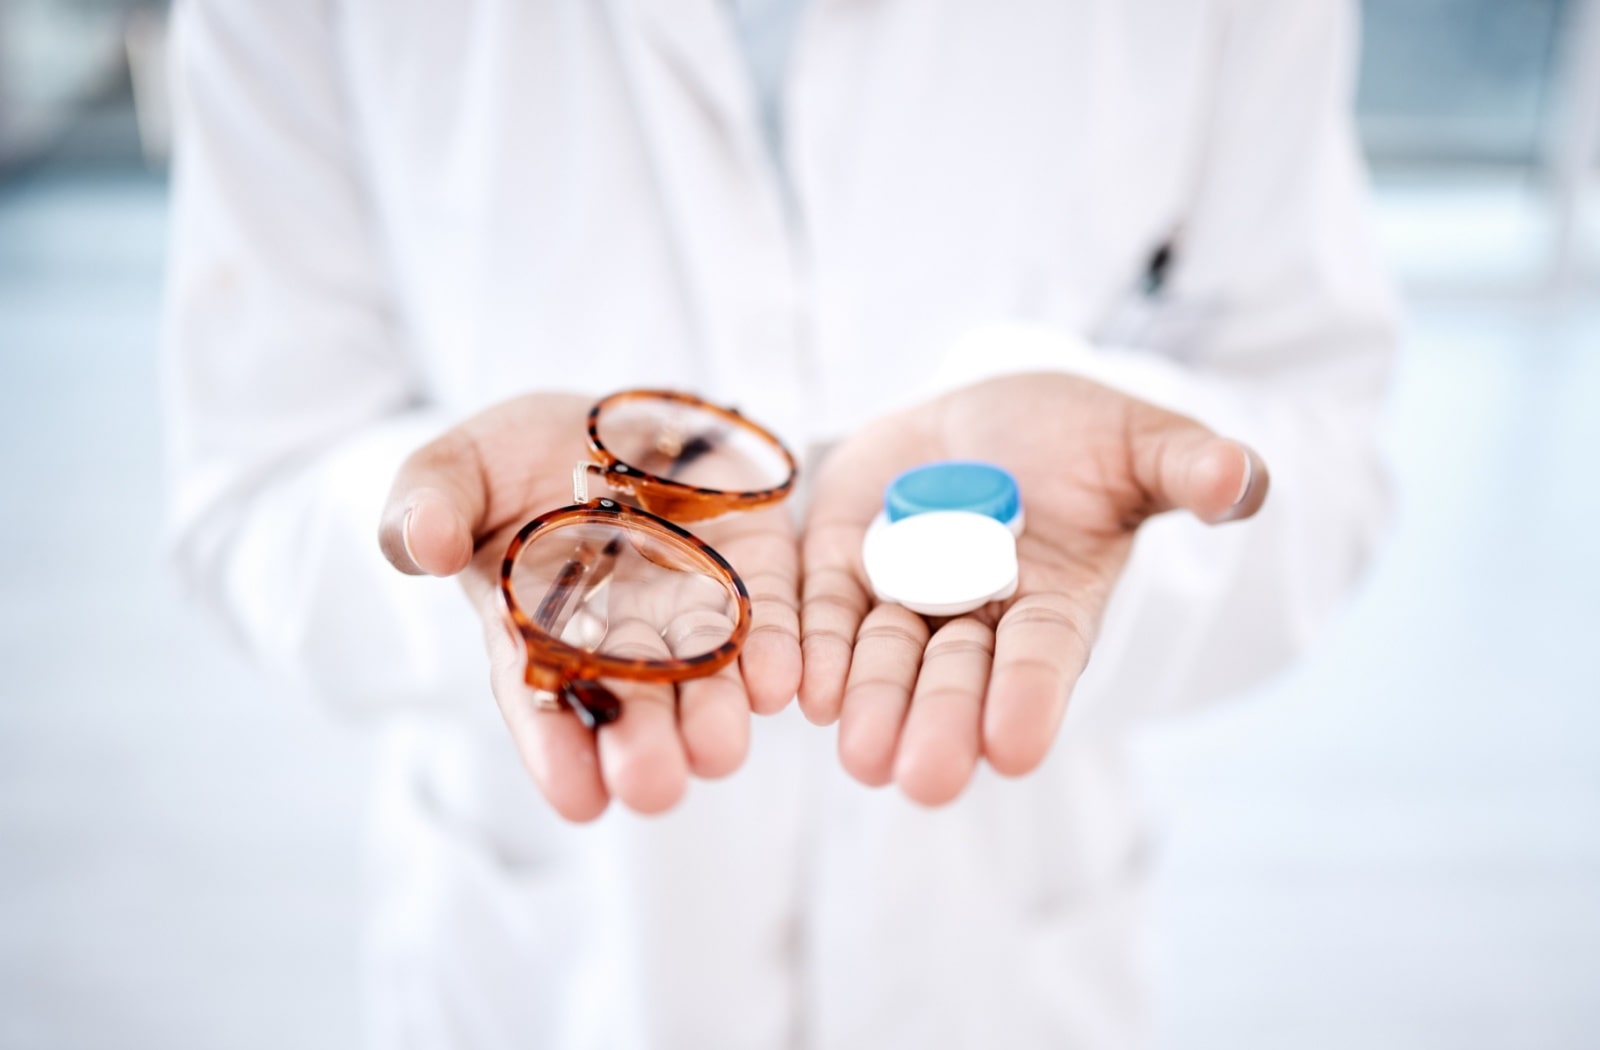 An optometrist holding out their hands, with a pair of glasses in one hand and a contact lens case in the other